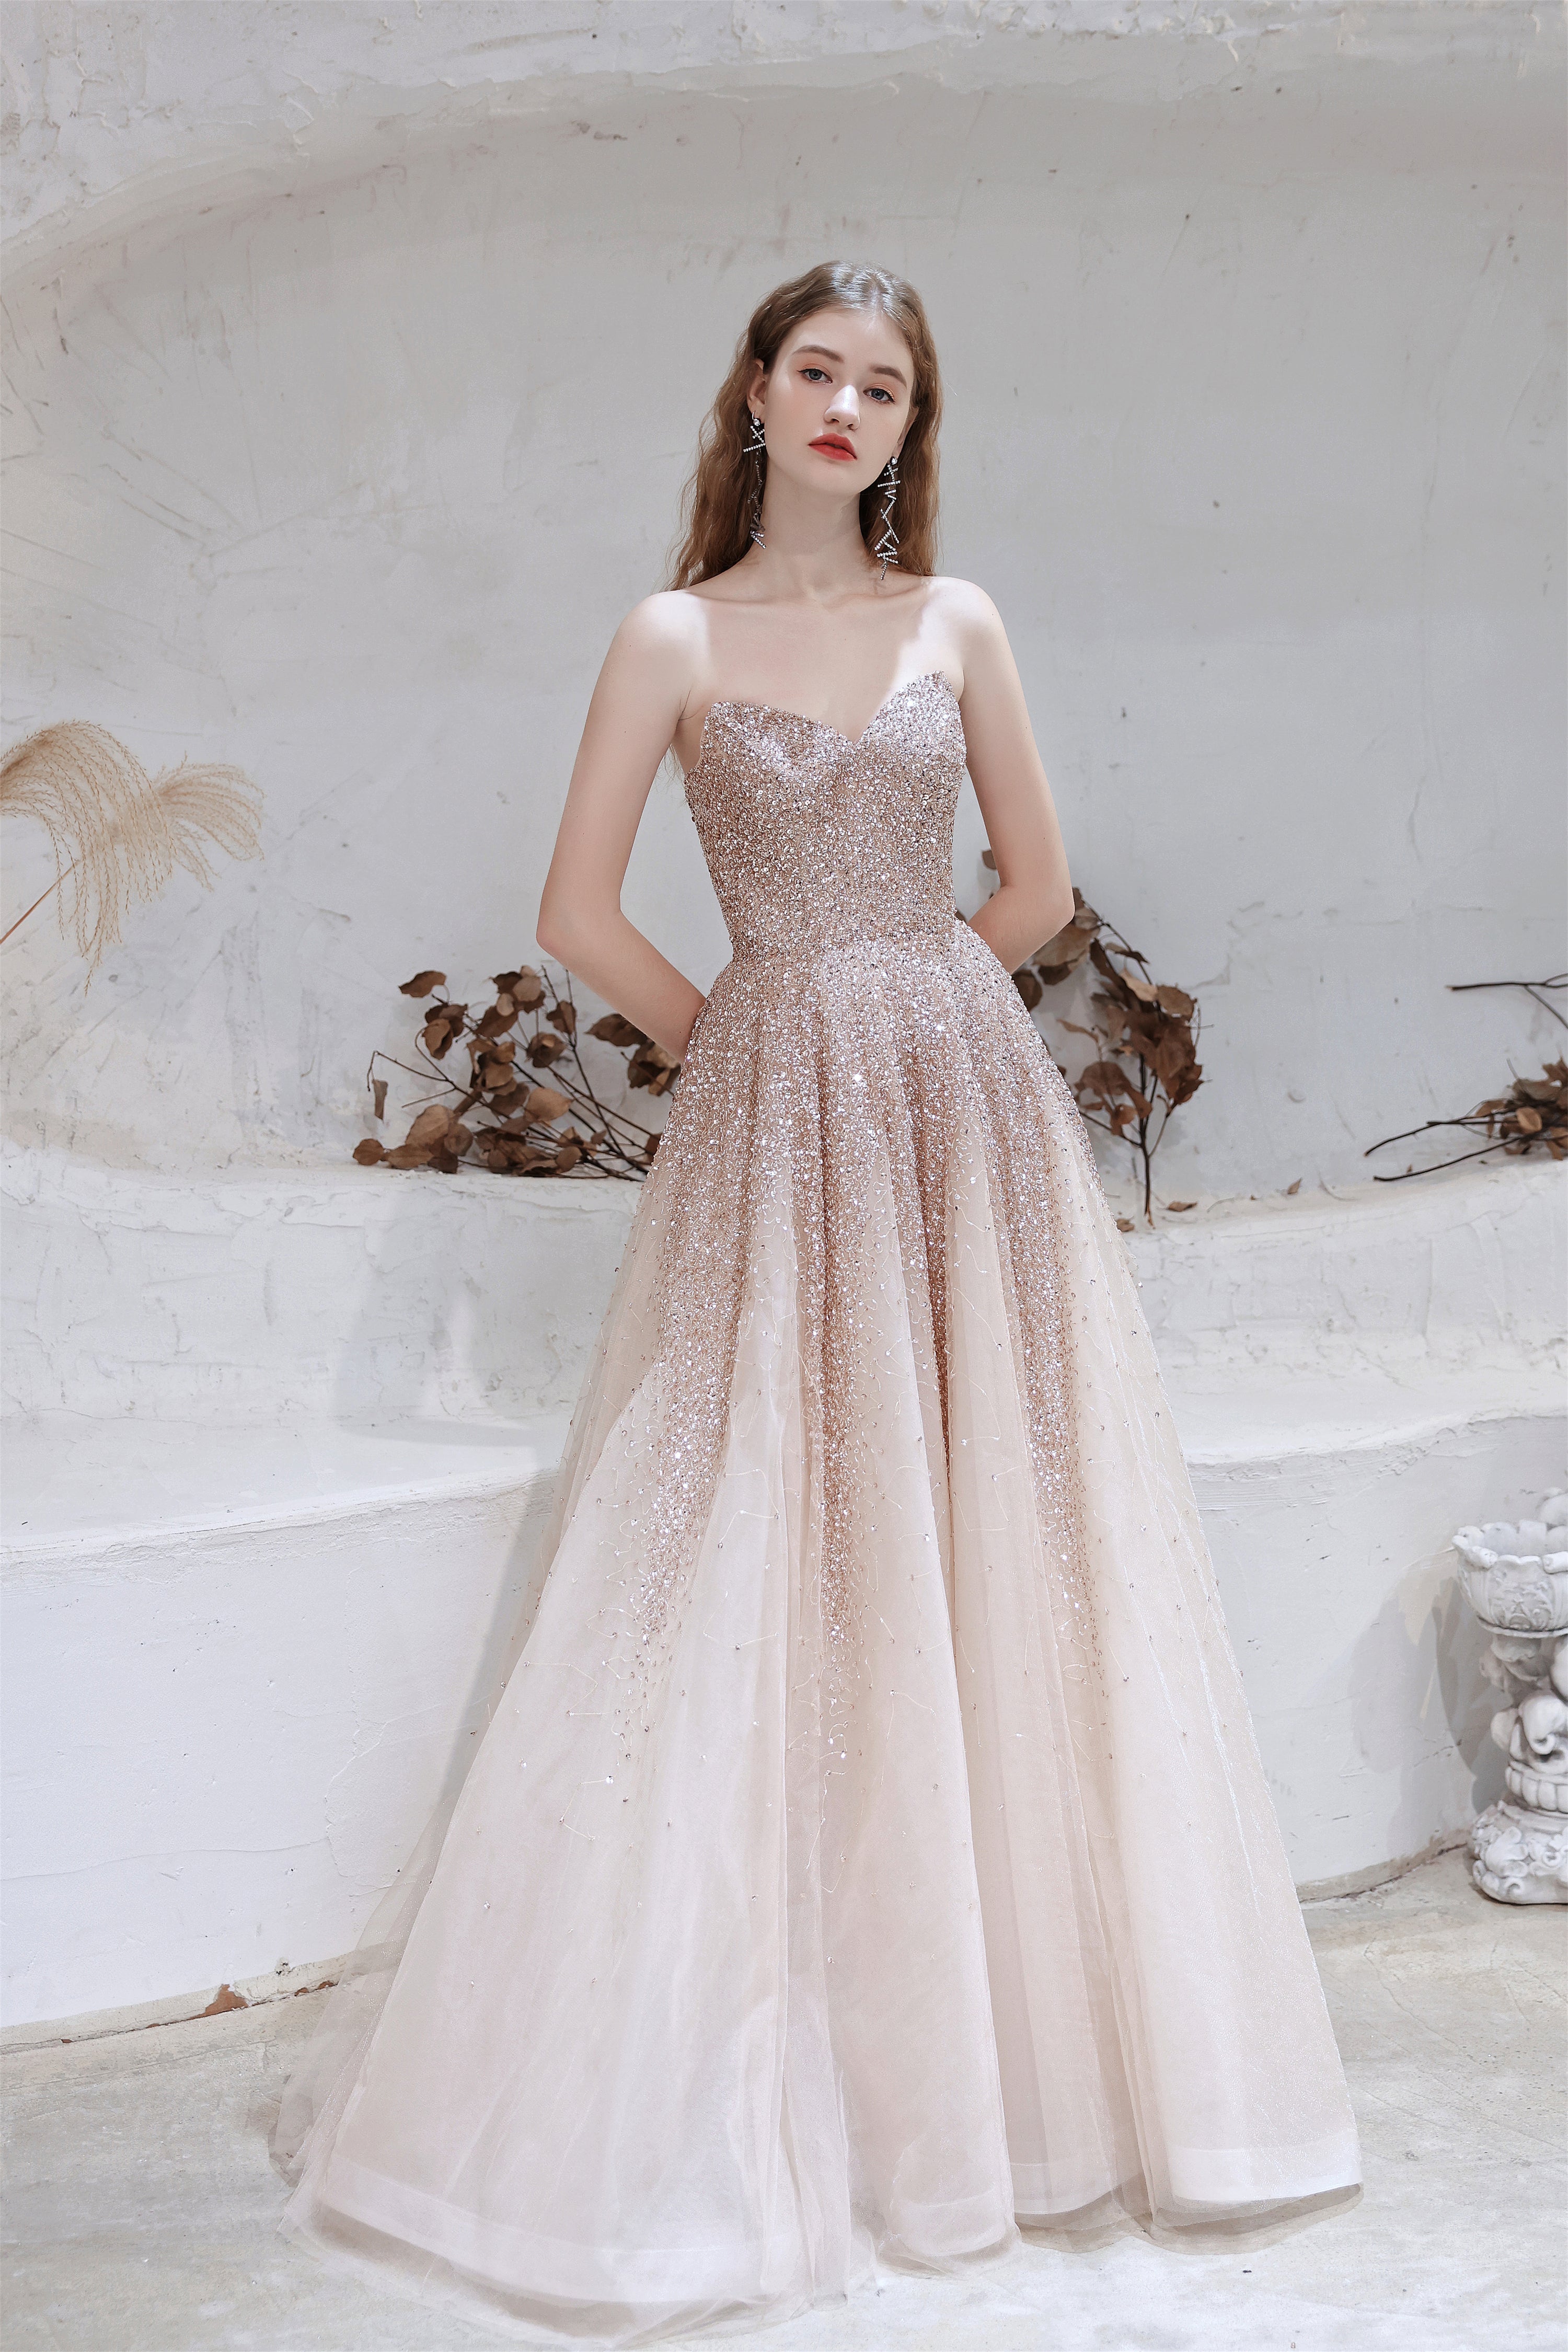 Homecoming Dresses Aesthetic, A Line Strapless Beading Tulle Court Train Prom Dresses